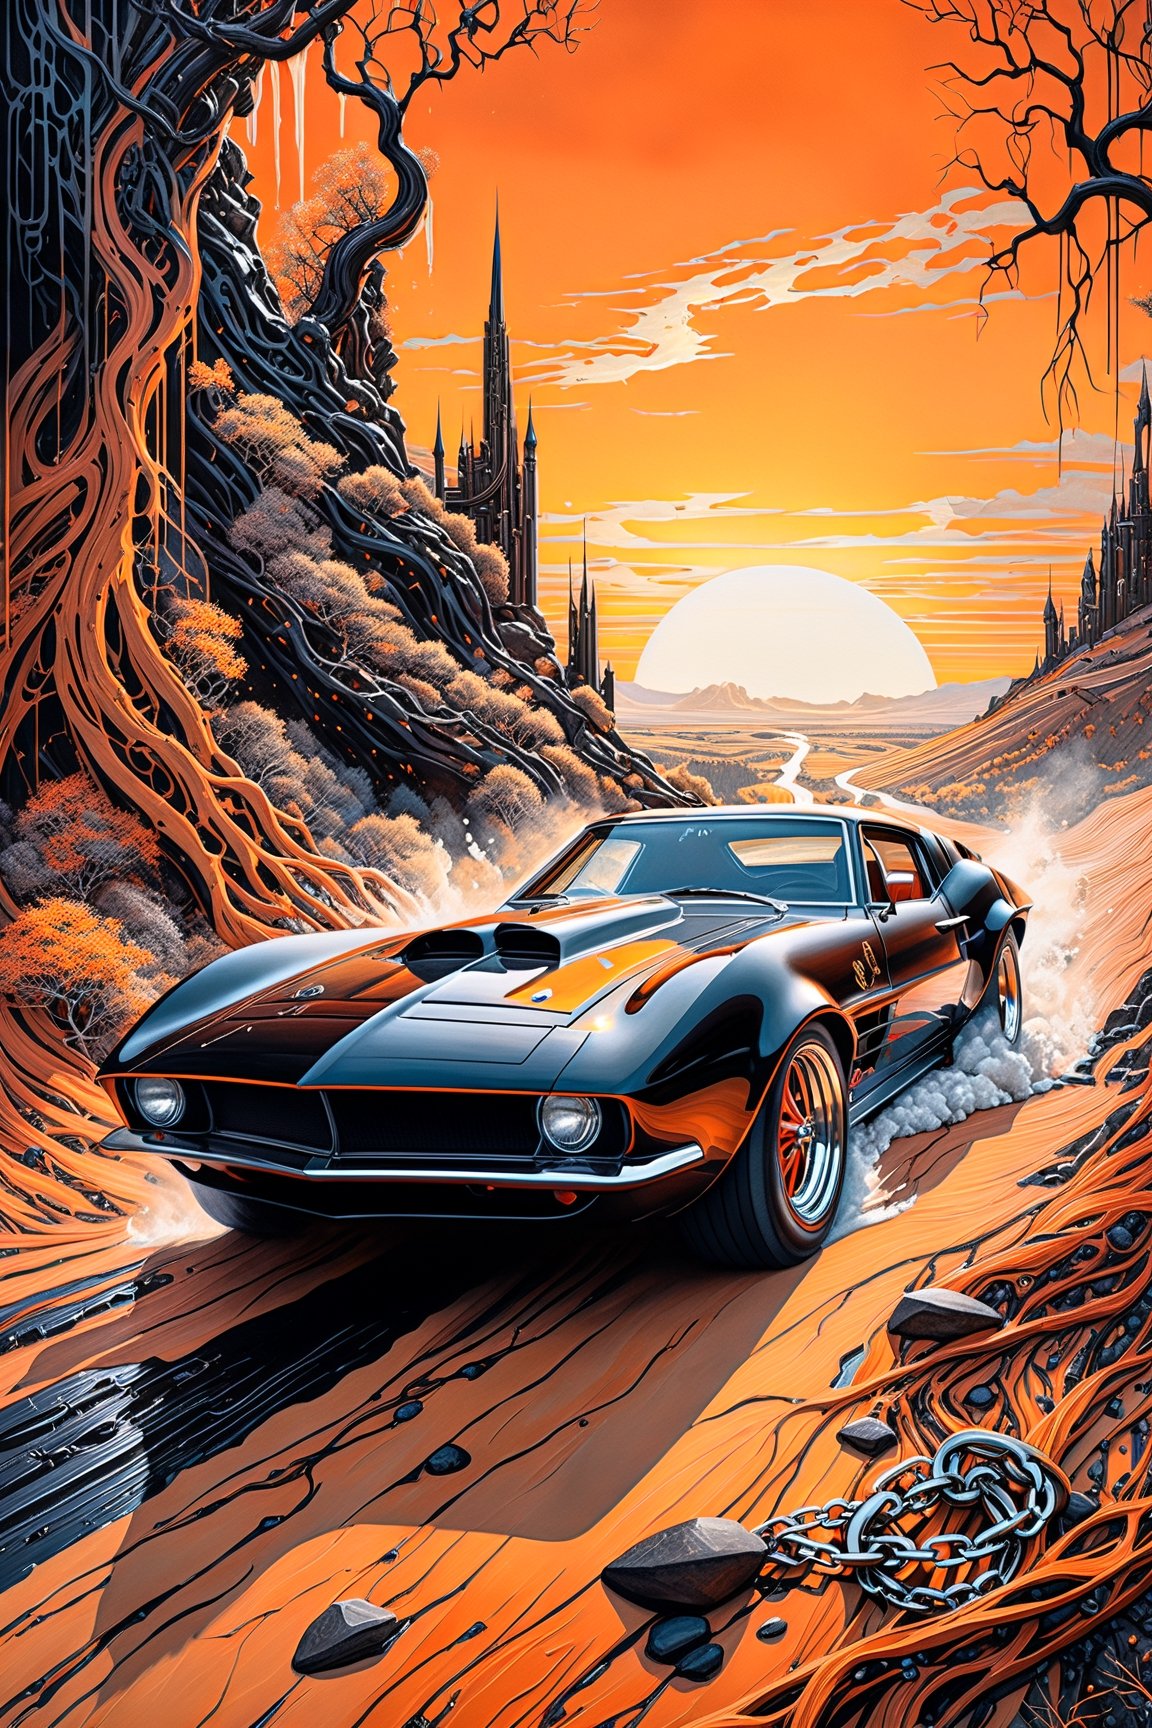 Ultra wide photorealistic medieval image exciting fusion between hot rod old school and sports car, custom design, full car. Dark sun, giant fully cybernetic spaceship floating in background shot, tree roots, thorny branches, iron chains, rocky path, black and orange black, Ink Flow - 8k photorealistic masterpiece - by Aaron Horkey and Jeremy Mann - close-up. liquid gouache: Jean Baptiste Mongue: calligraphy: acrylic: color watercolor, cinematic lighting, maximalist photo illustration: marton Bobzert: 8k concept art, intricately detailed realism, complex, elegant, vast, fantastic and psychedelic, dripping colors,